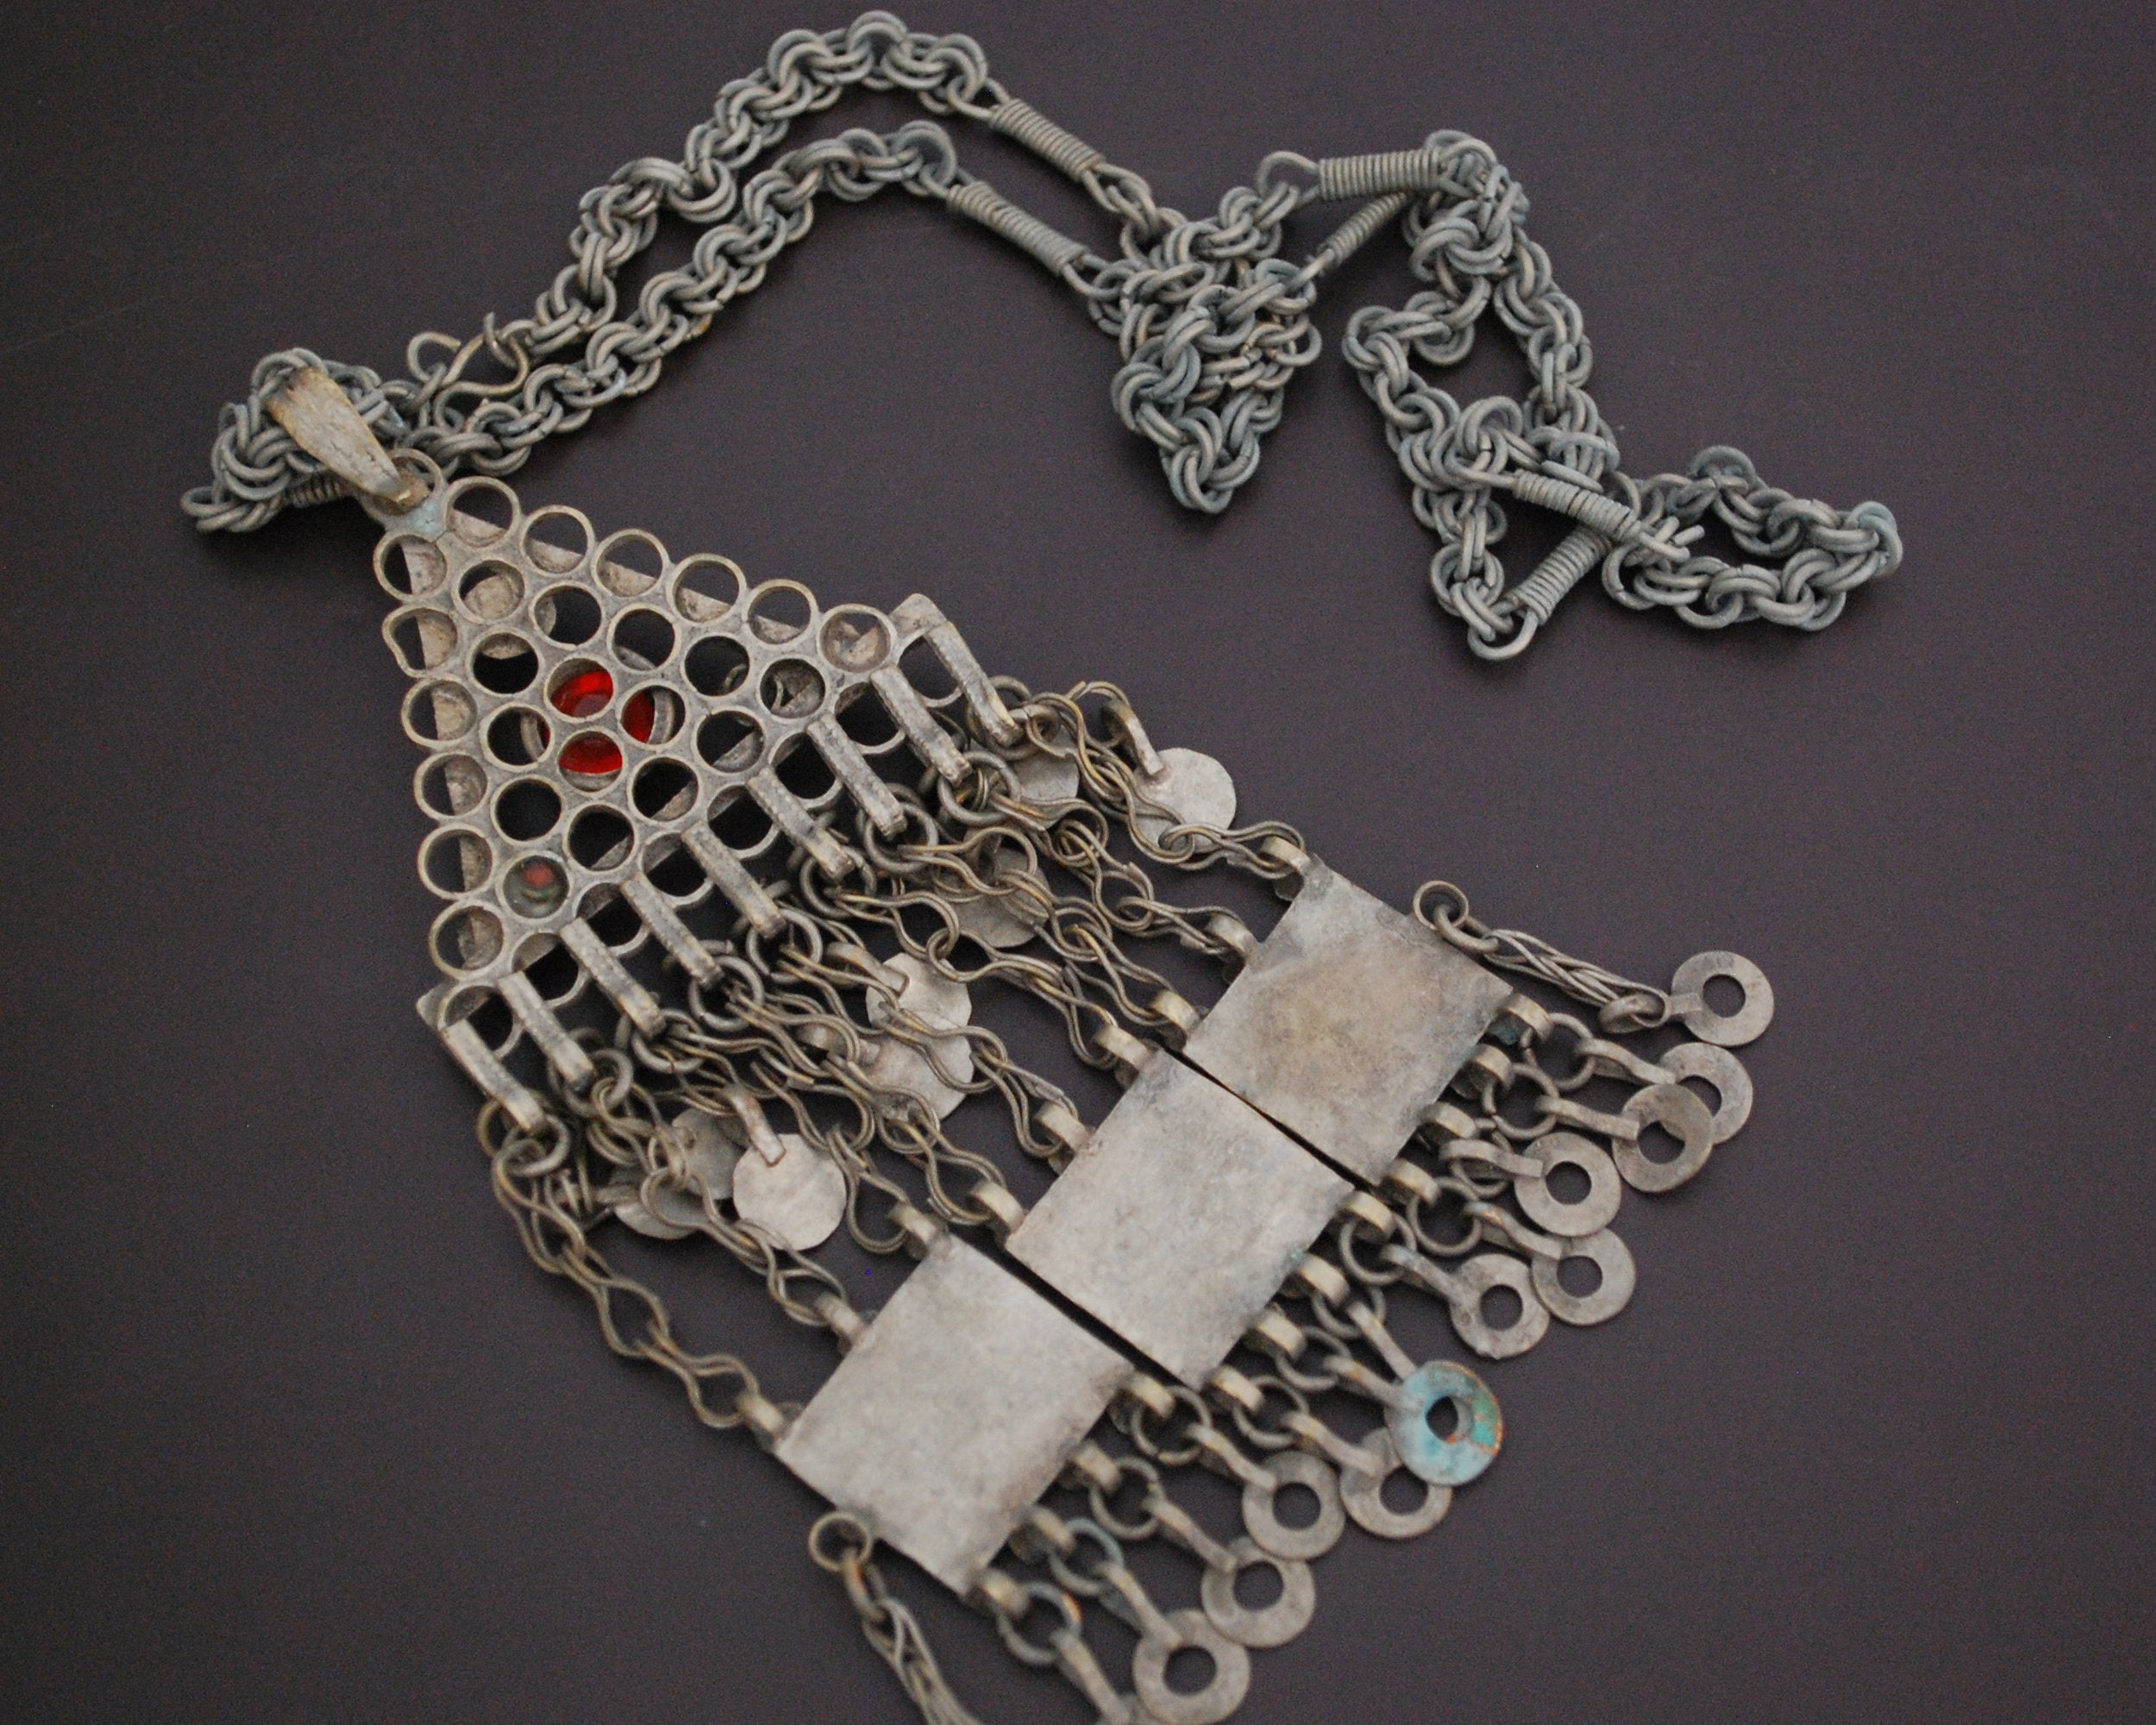 Afghani Kuchi Necklace with Glass and Tassels